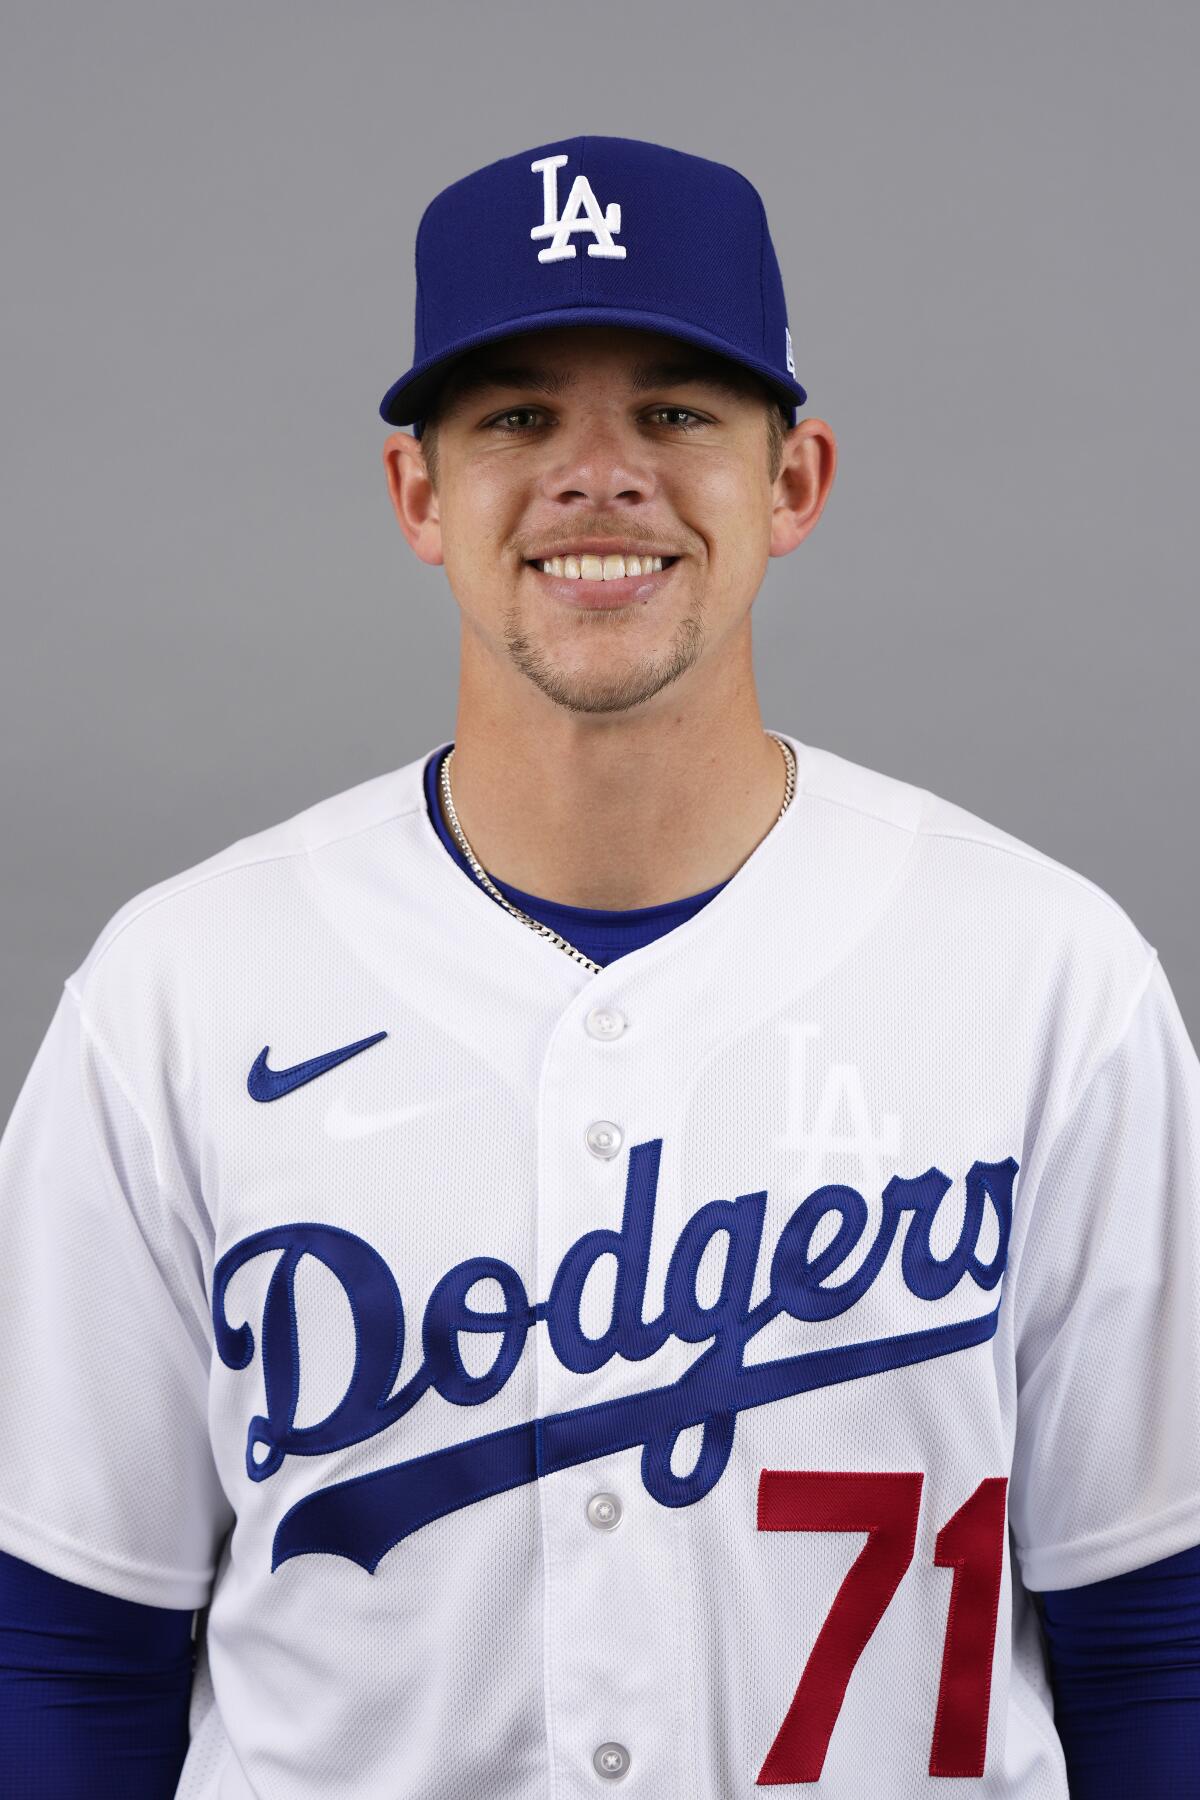 Dodgers pitching prospect Gavin Stone